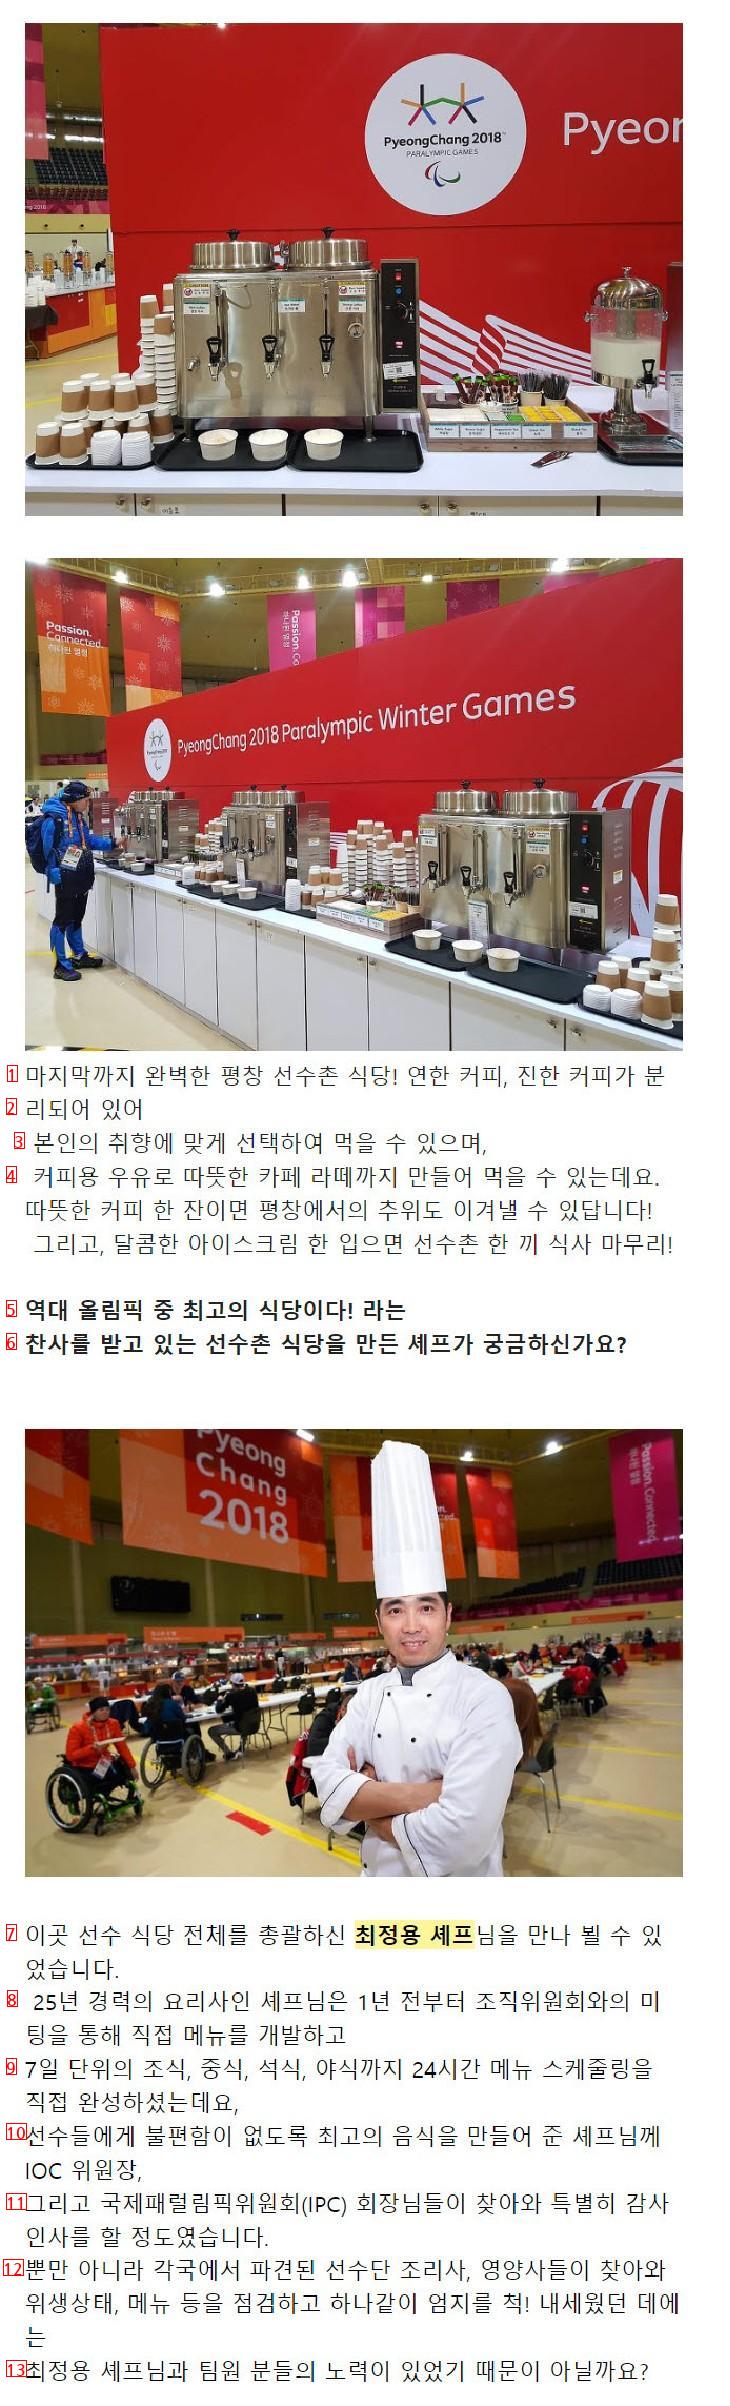 At the time of the PyeongChang Olympics, the restaurant class in the athletes' village